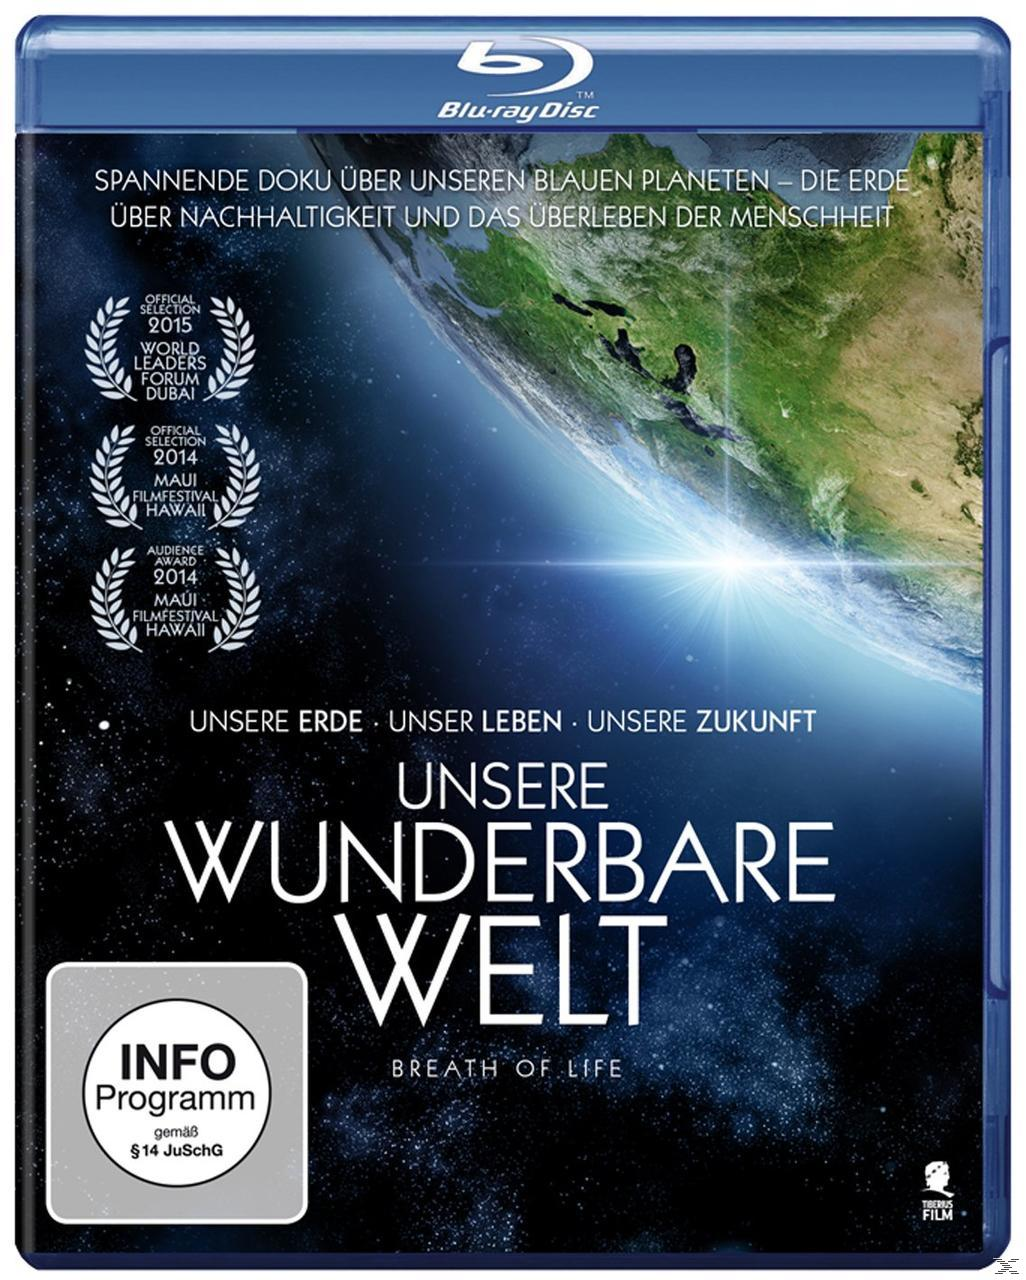 Blu-ray Life wunderbare of Breath Welt - Unsere